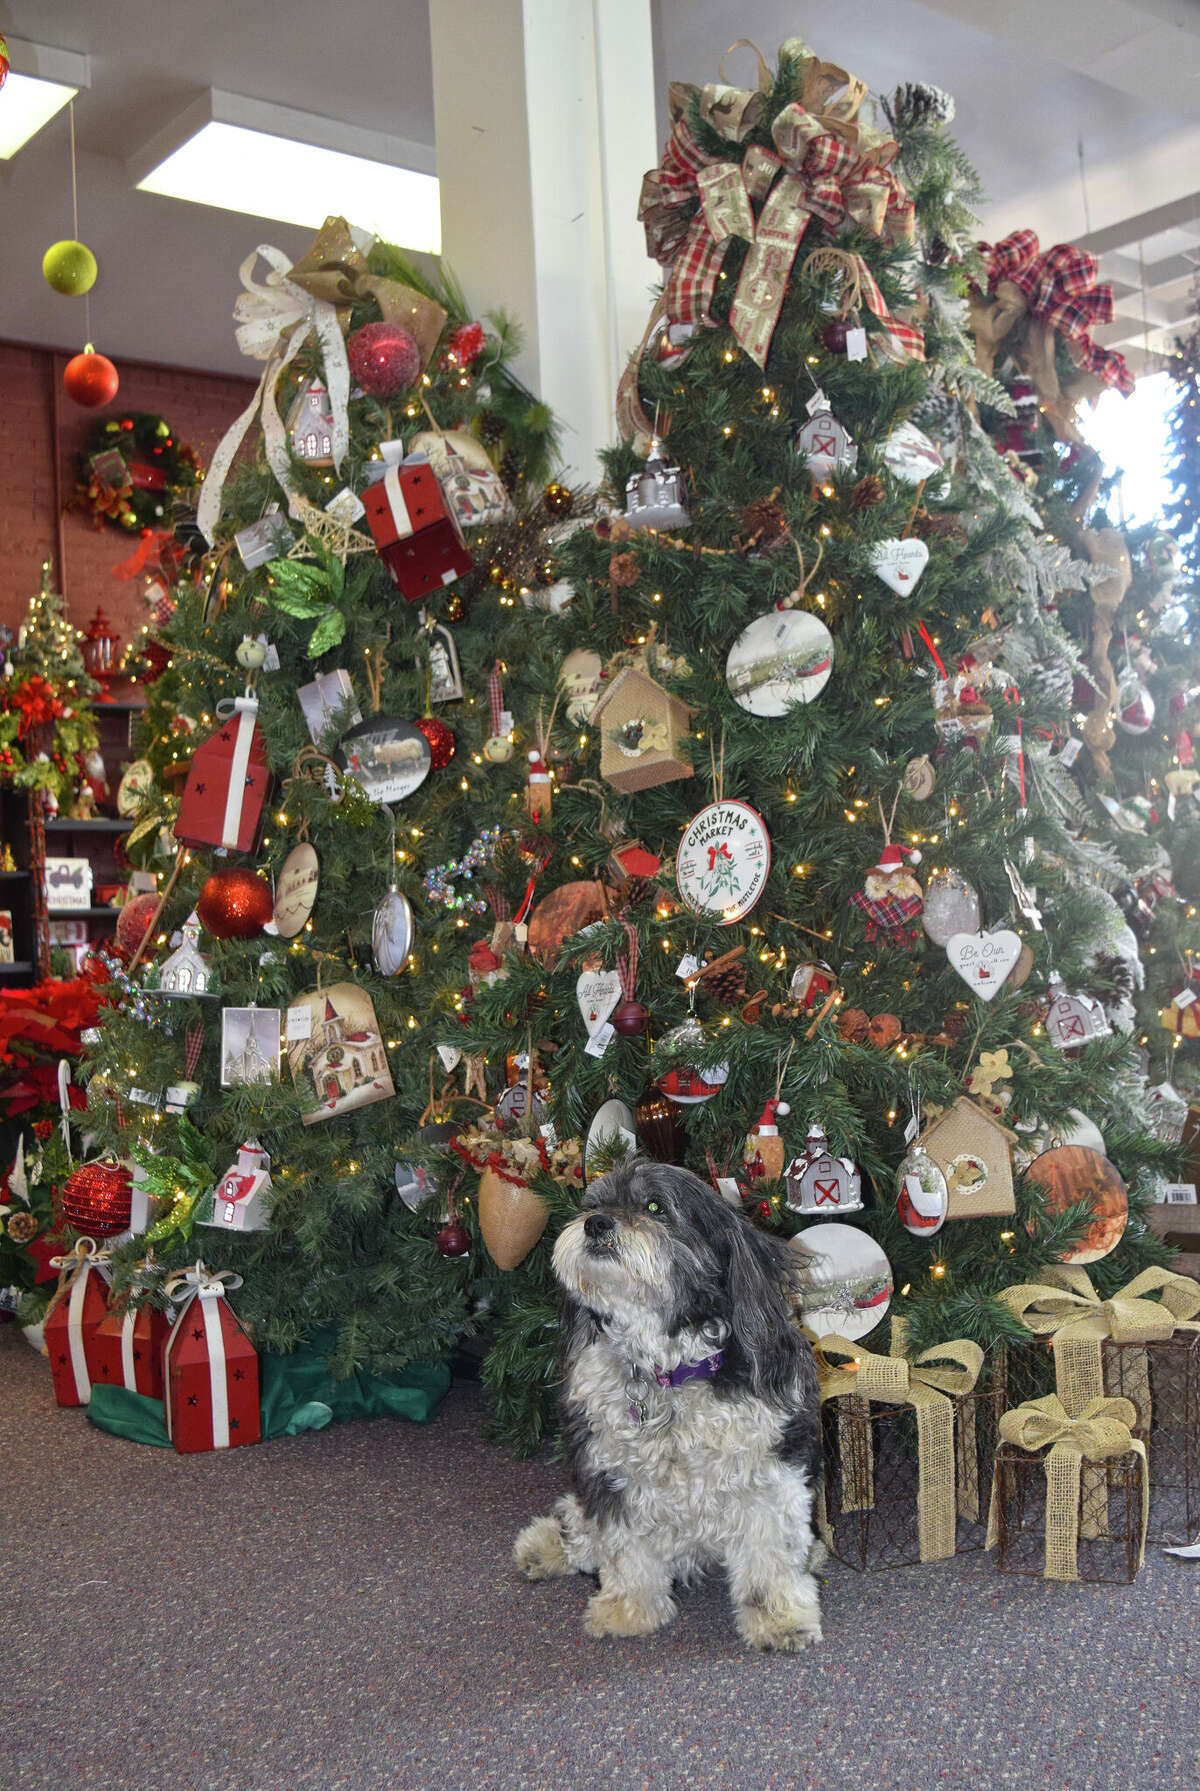 Ivy, a 13-year-old Lhasa Apso-cocker spaniel mix, sits underneath the Christmas trees at Flowers N More in Pittsfield. Owner Carla Black said Ivy has been a fixture of the store since she was 12 weeks old.